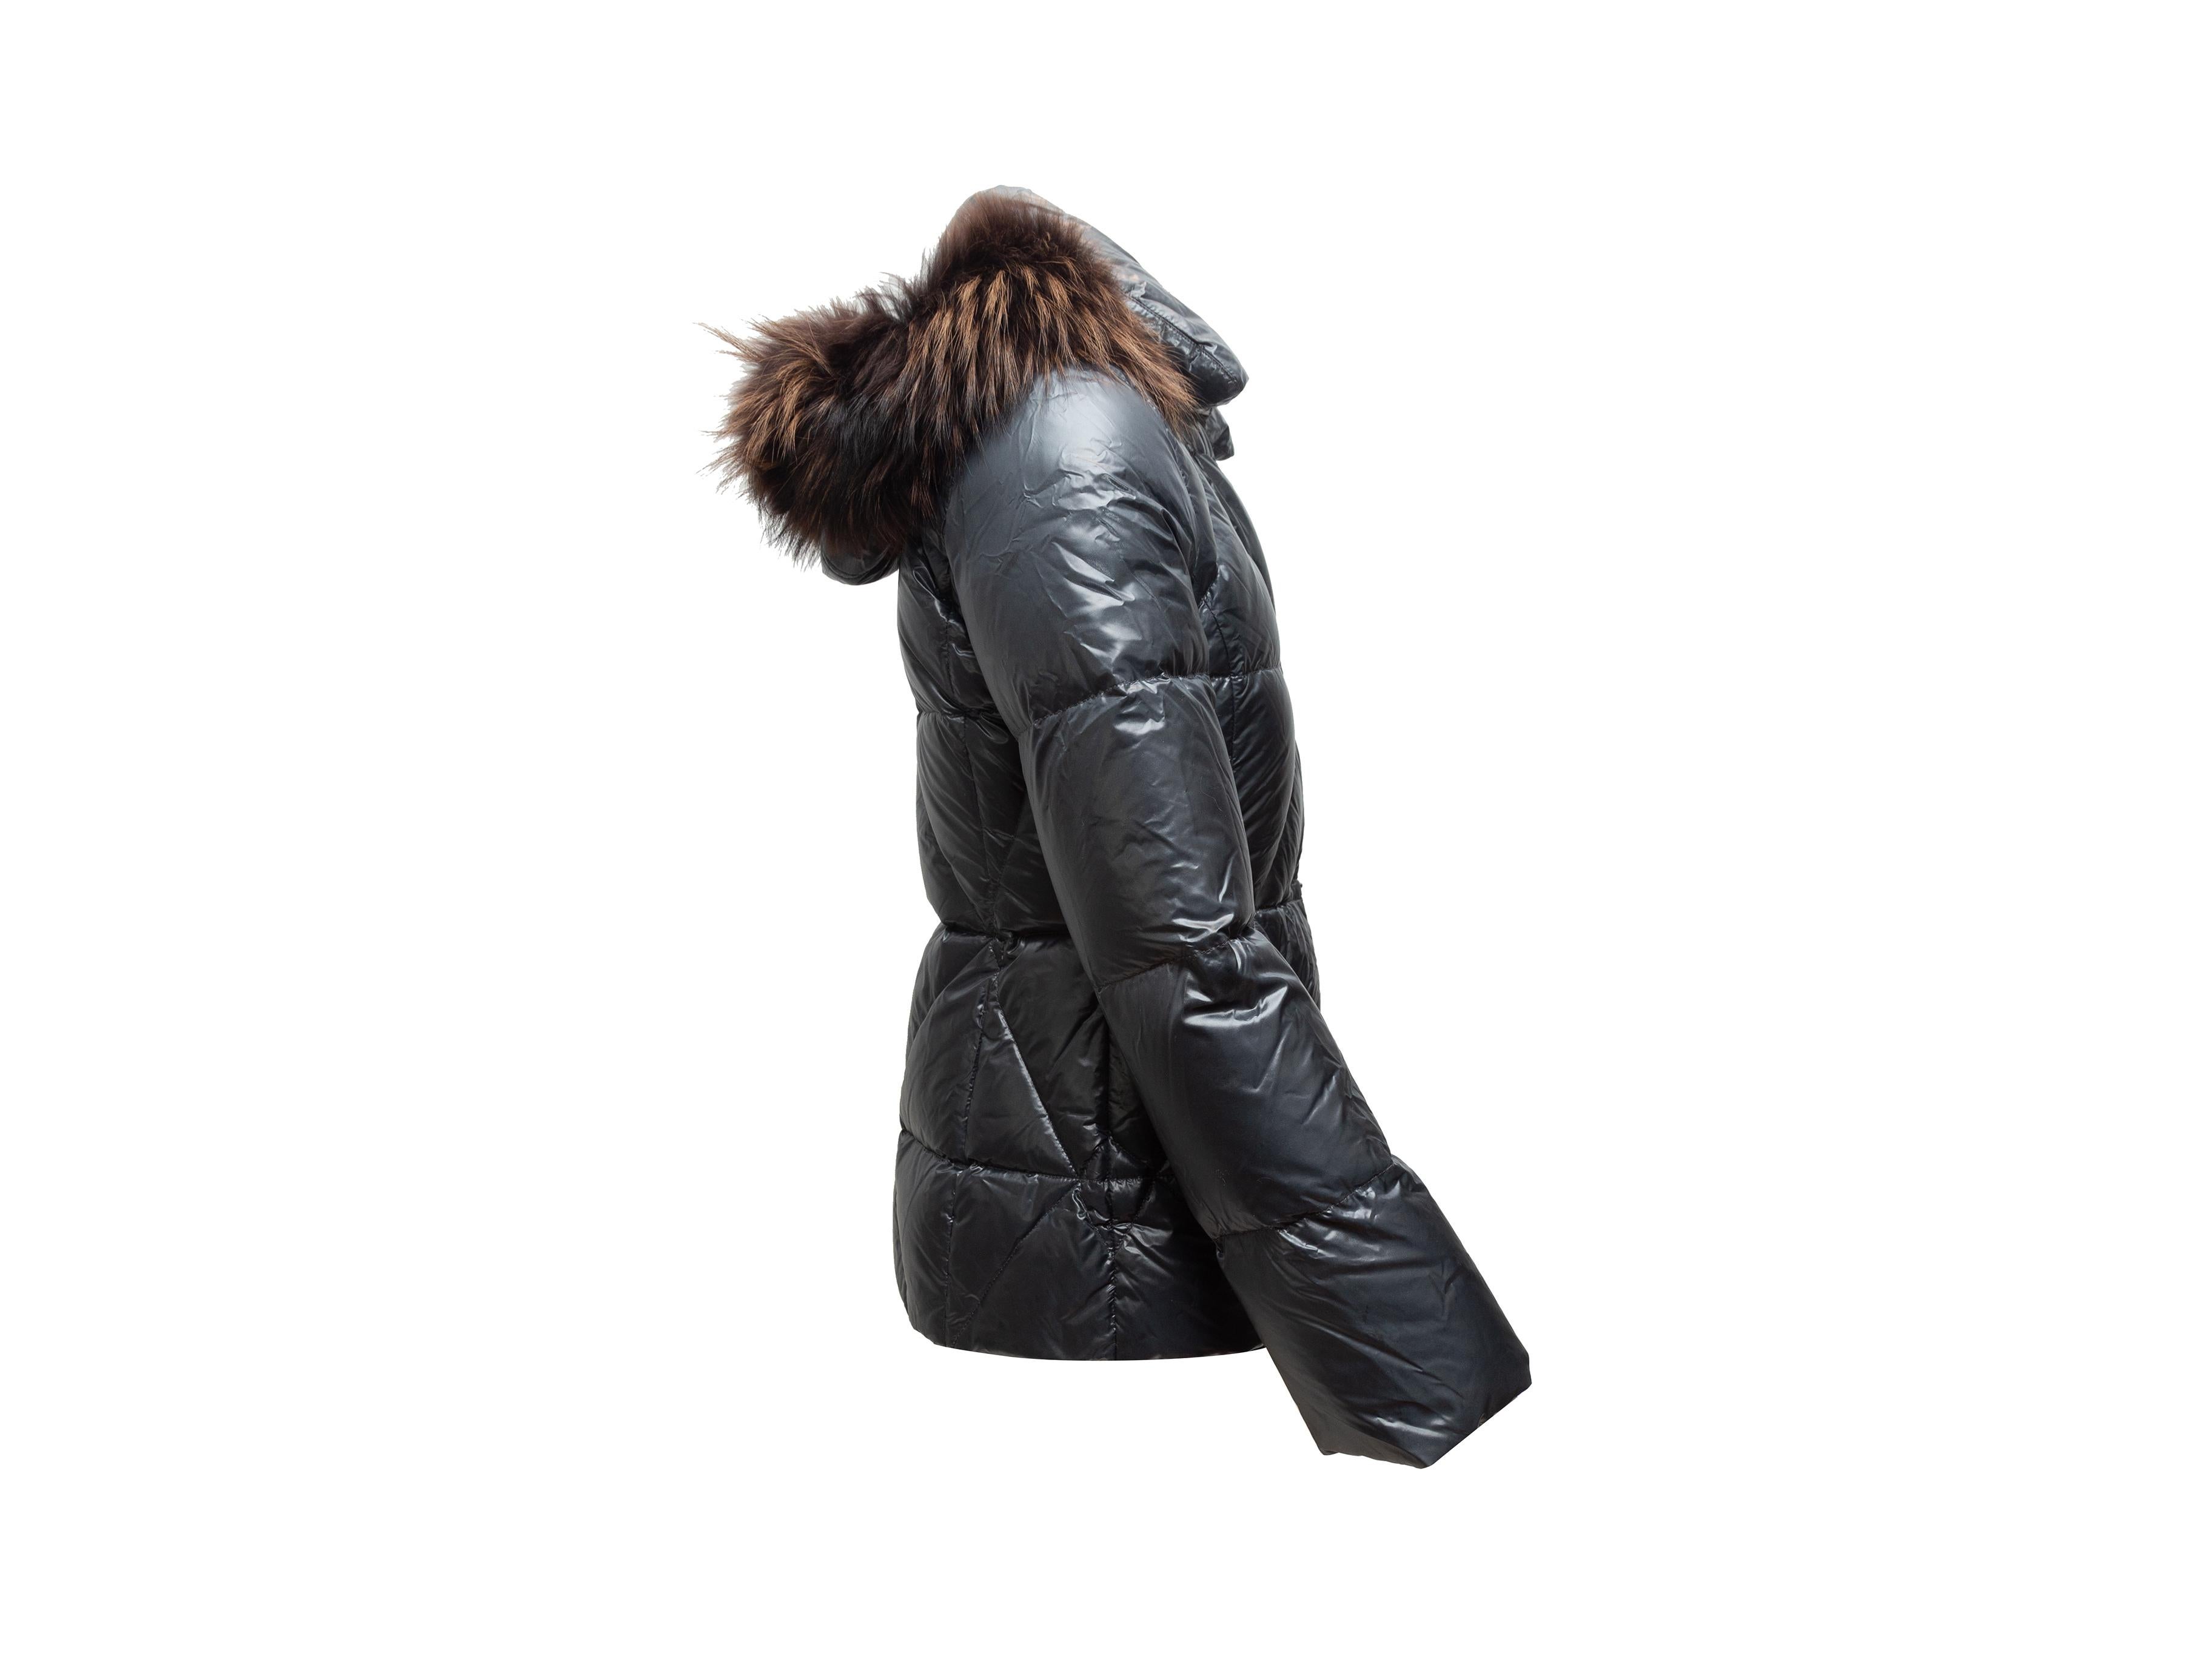 Product details: Grey down puffer jacket by Fay. Fur-trimmed hood. Dual hip pockets. Closures at center front. 35